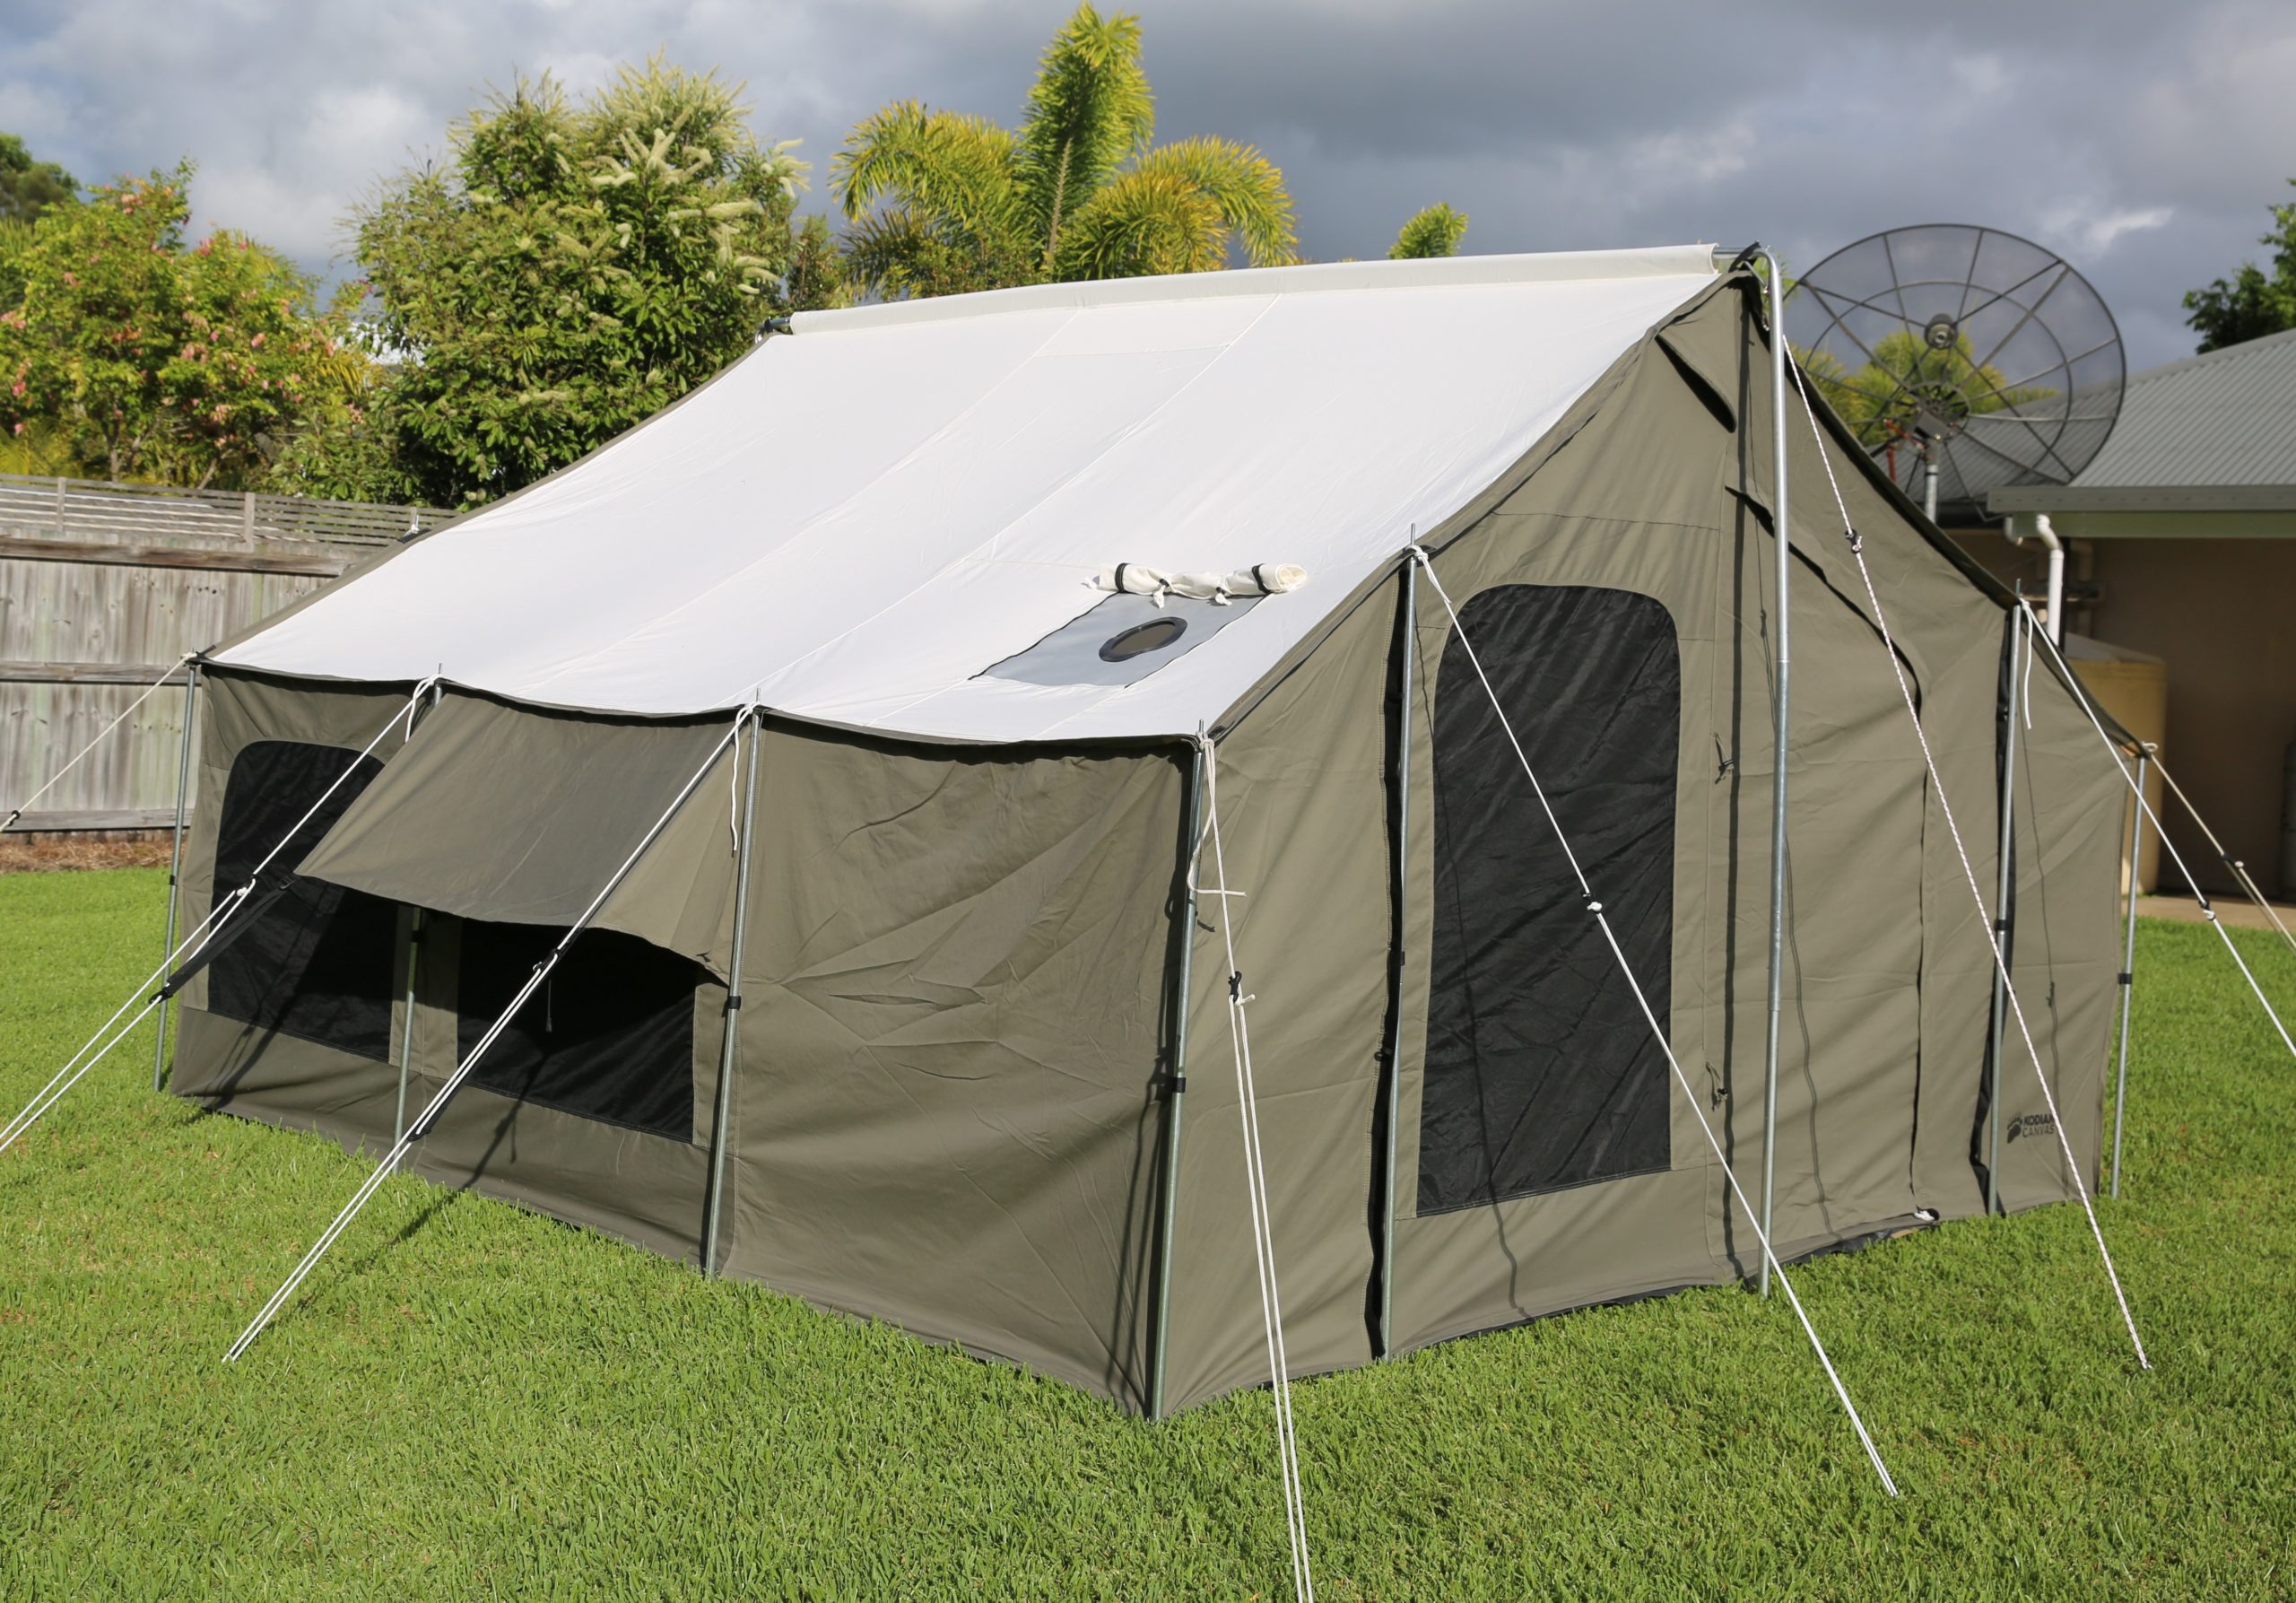 Fourth whip husband kodiak canvas 8 person cabin lodge tent Deduct ...